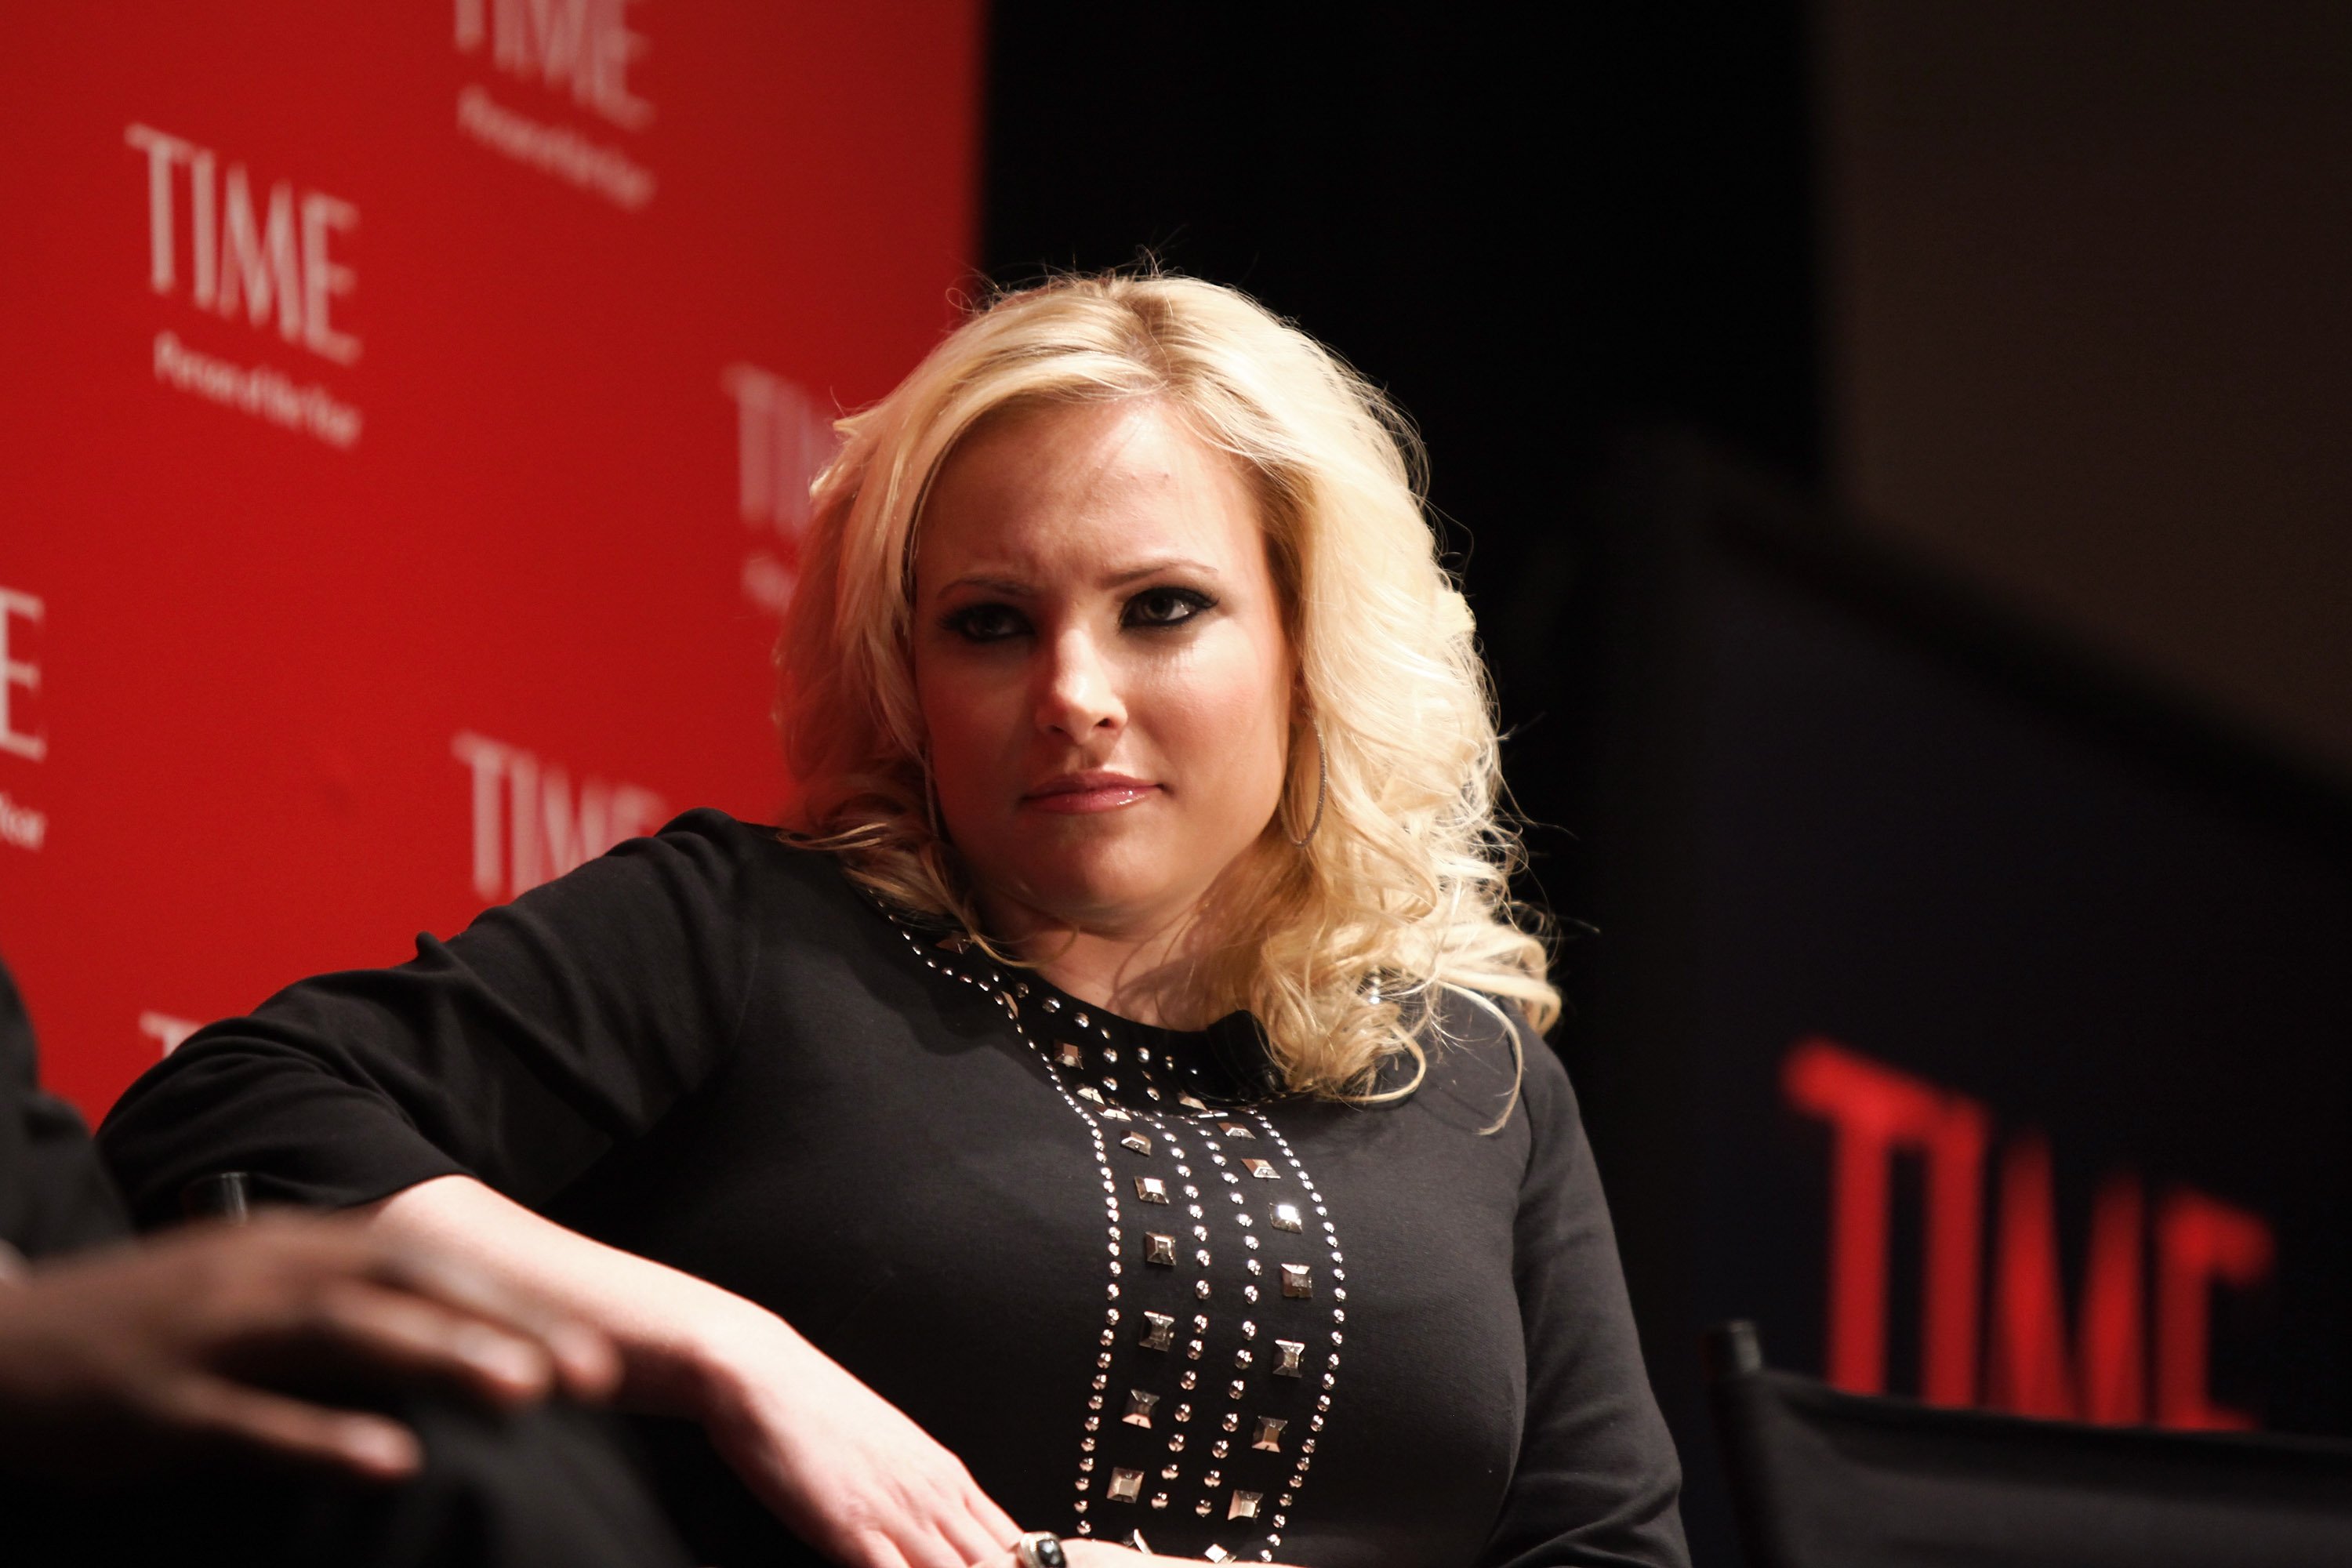 Author Meghan McCain as one of the panels for TIME's 2010 Person of the Year in New York. | Photo: Getty Images